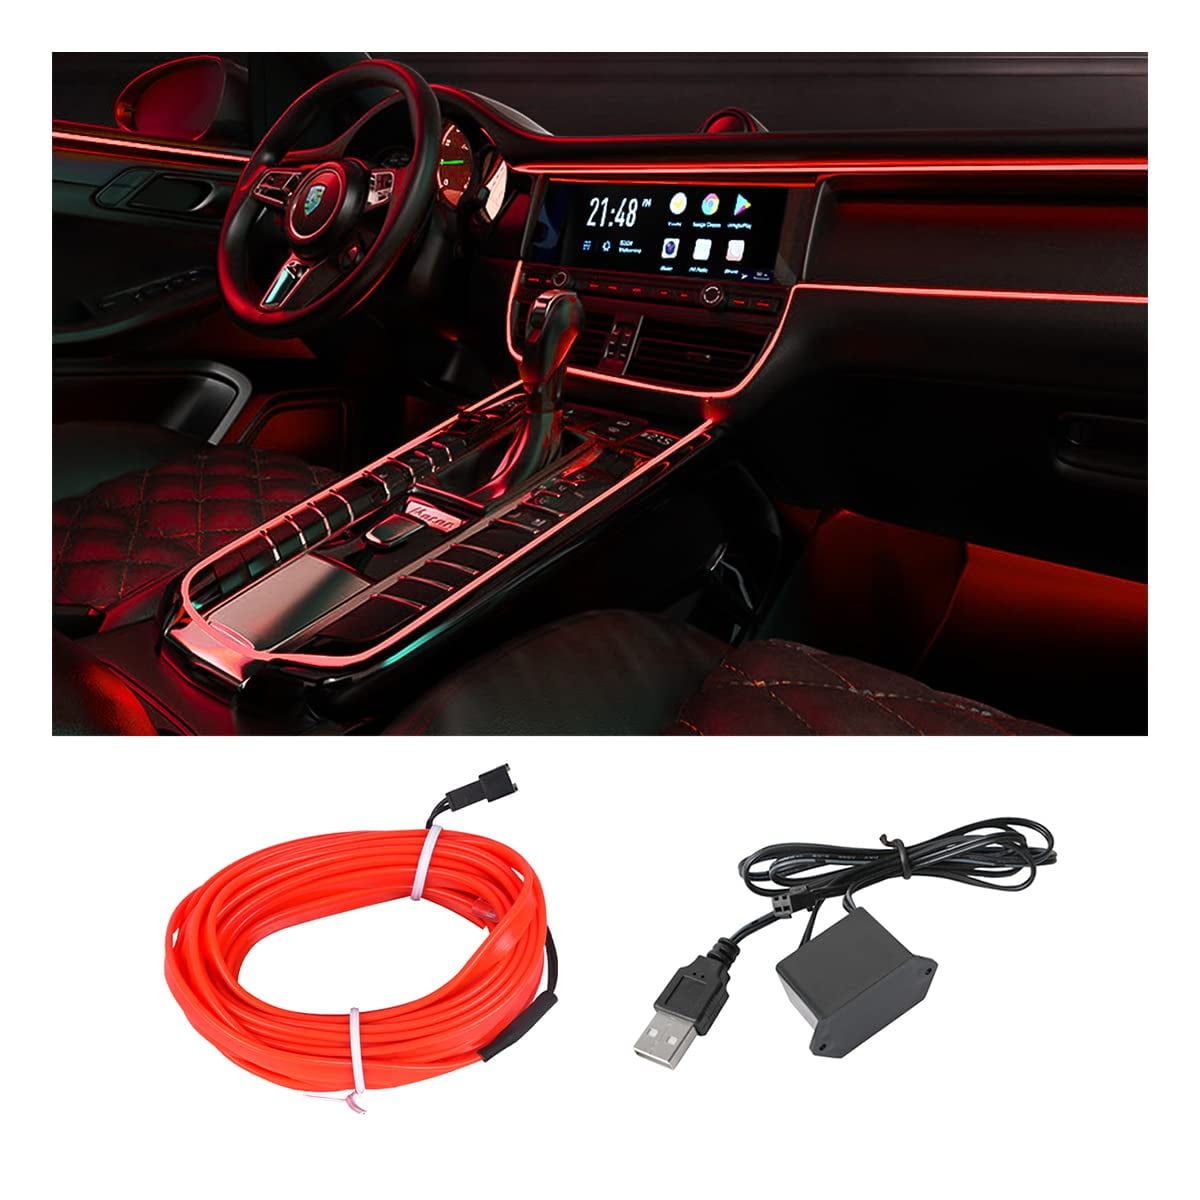 EL Wire Car LED Strip Lights, USB Auto Neon Strip with Sewing Edge, 3.3FT Electroluminescent Car Ambient Kits with Fuse Protection, Car Interior Decoration Accessories - Walmart.com